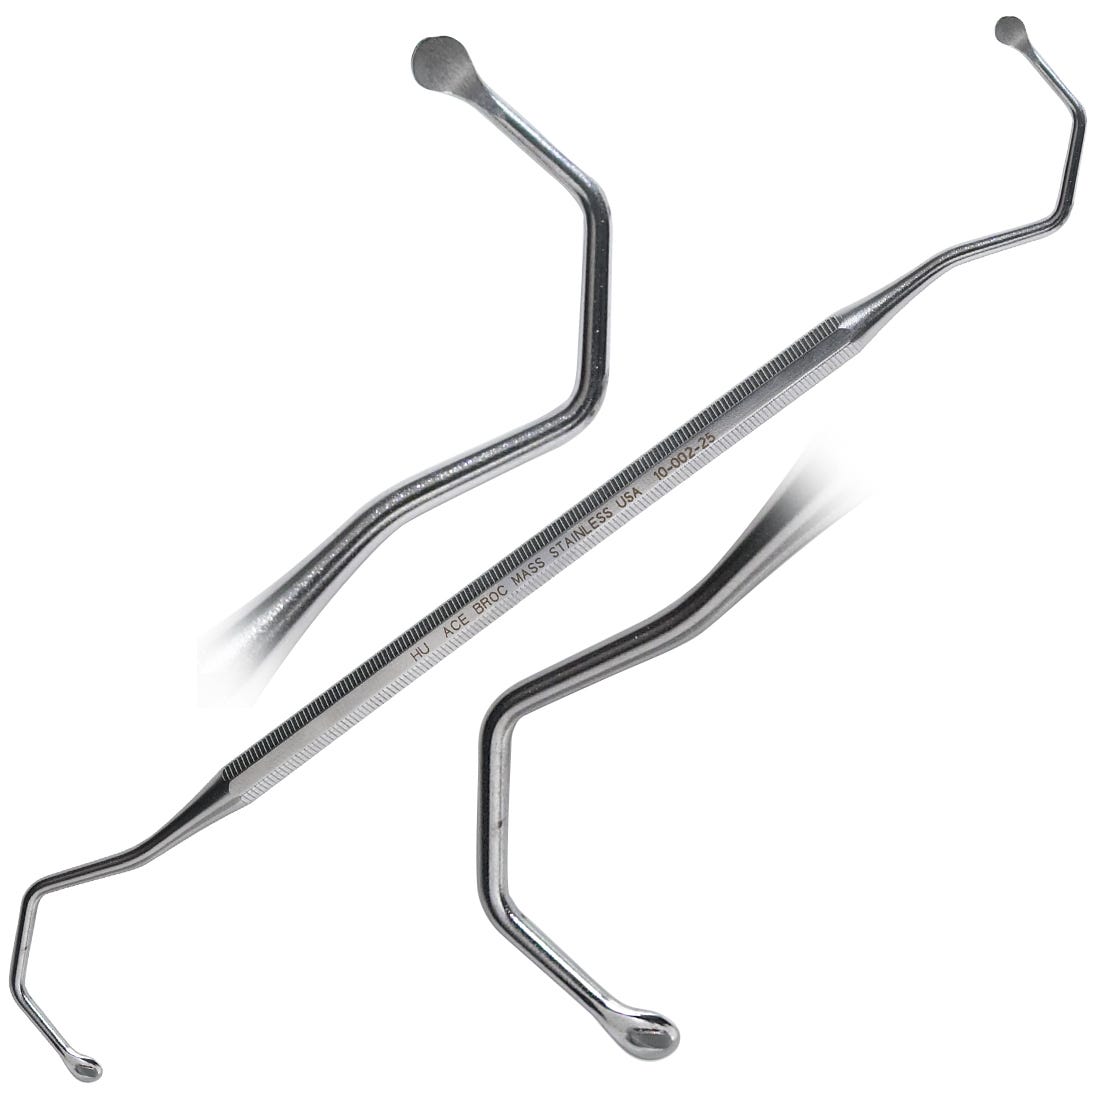 ACE Antral Curette #1, double ended